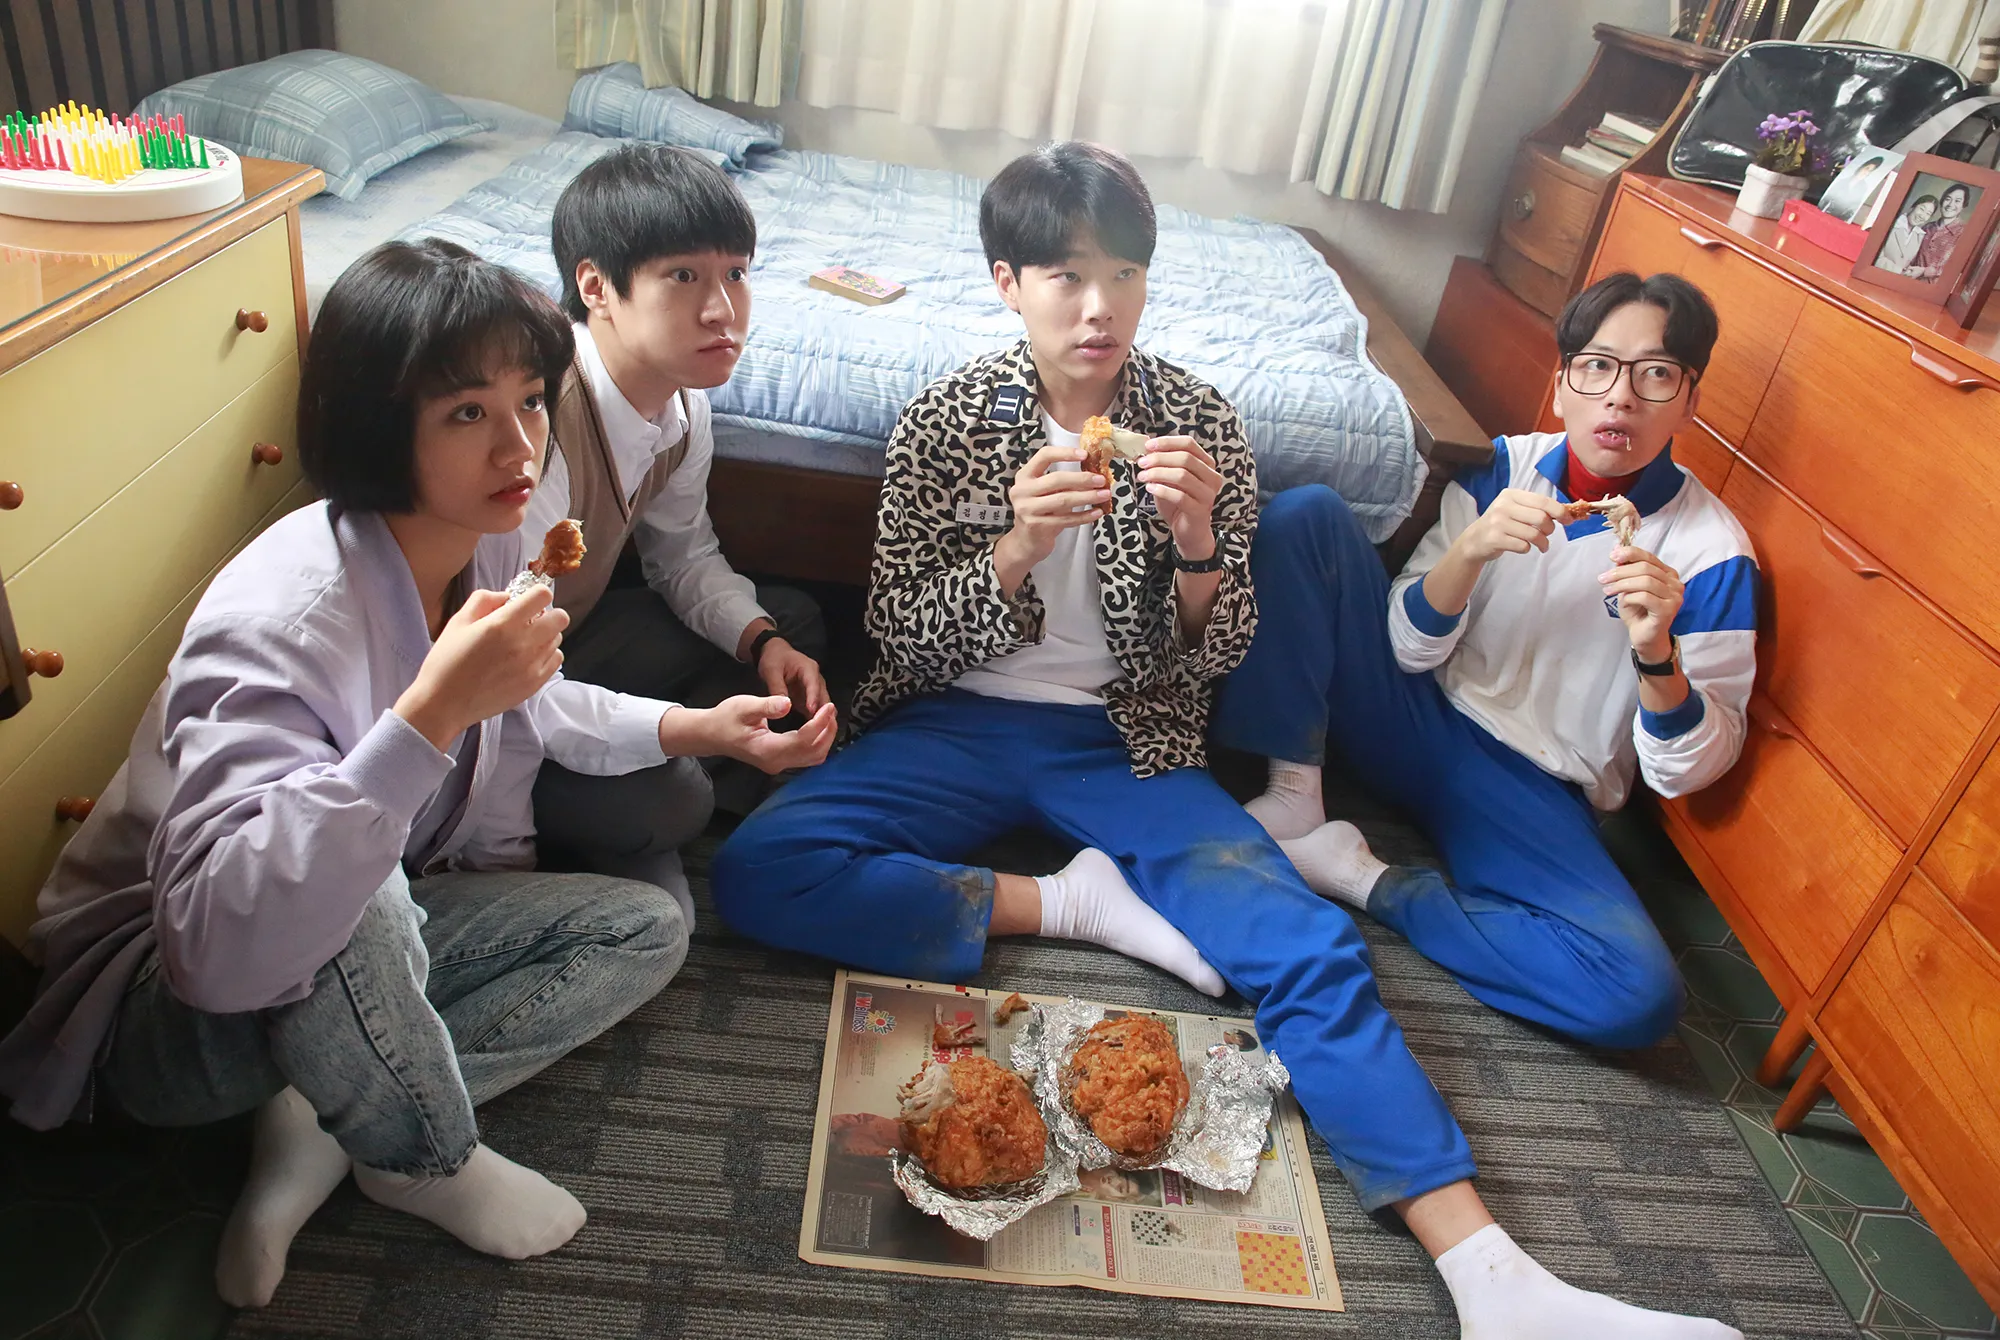 Reply 1988 Review